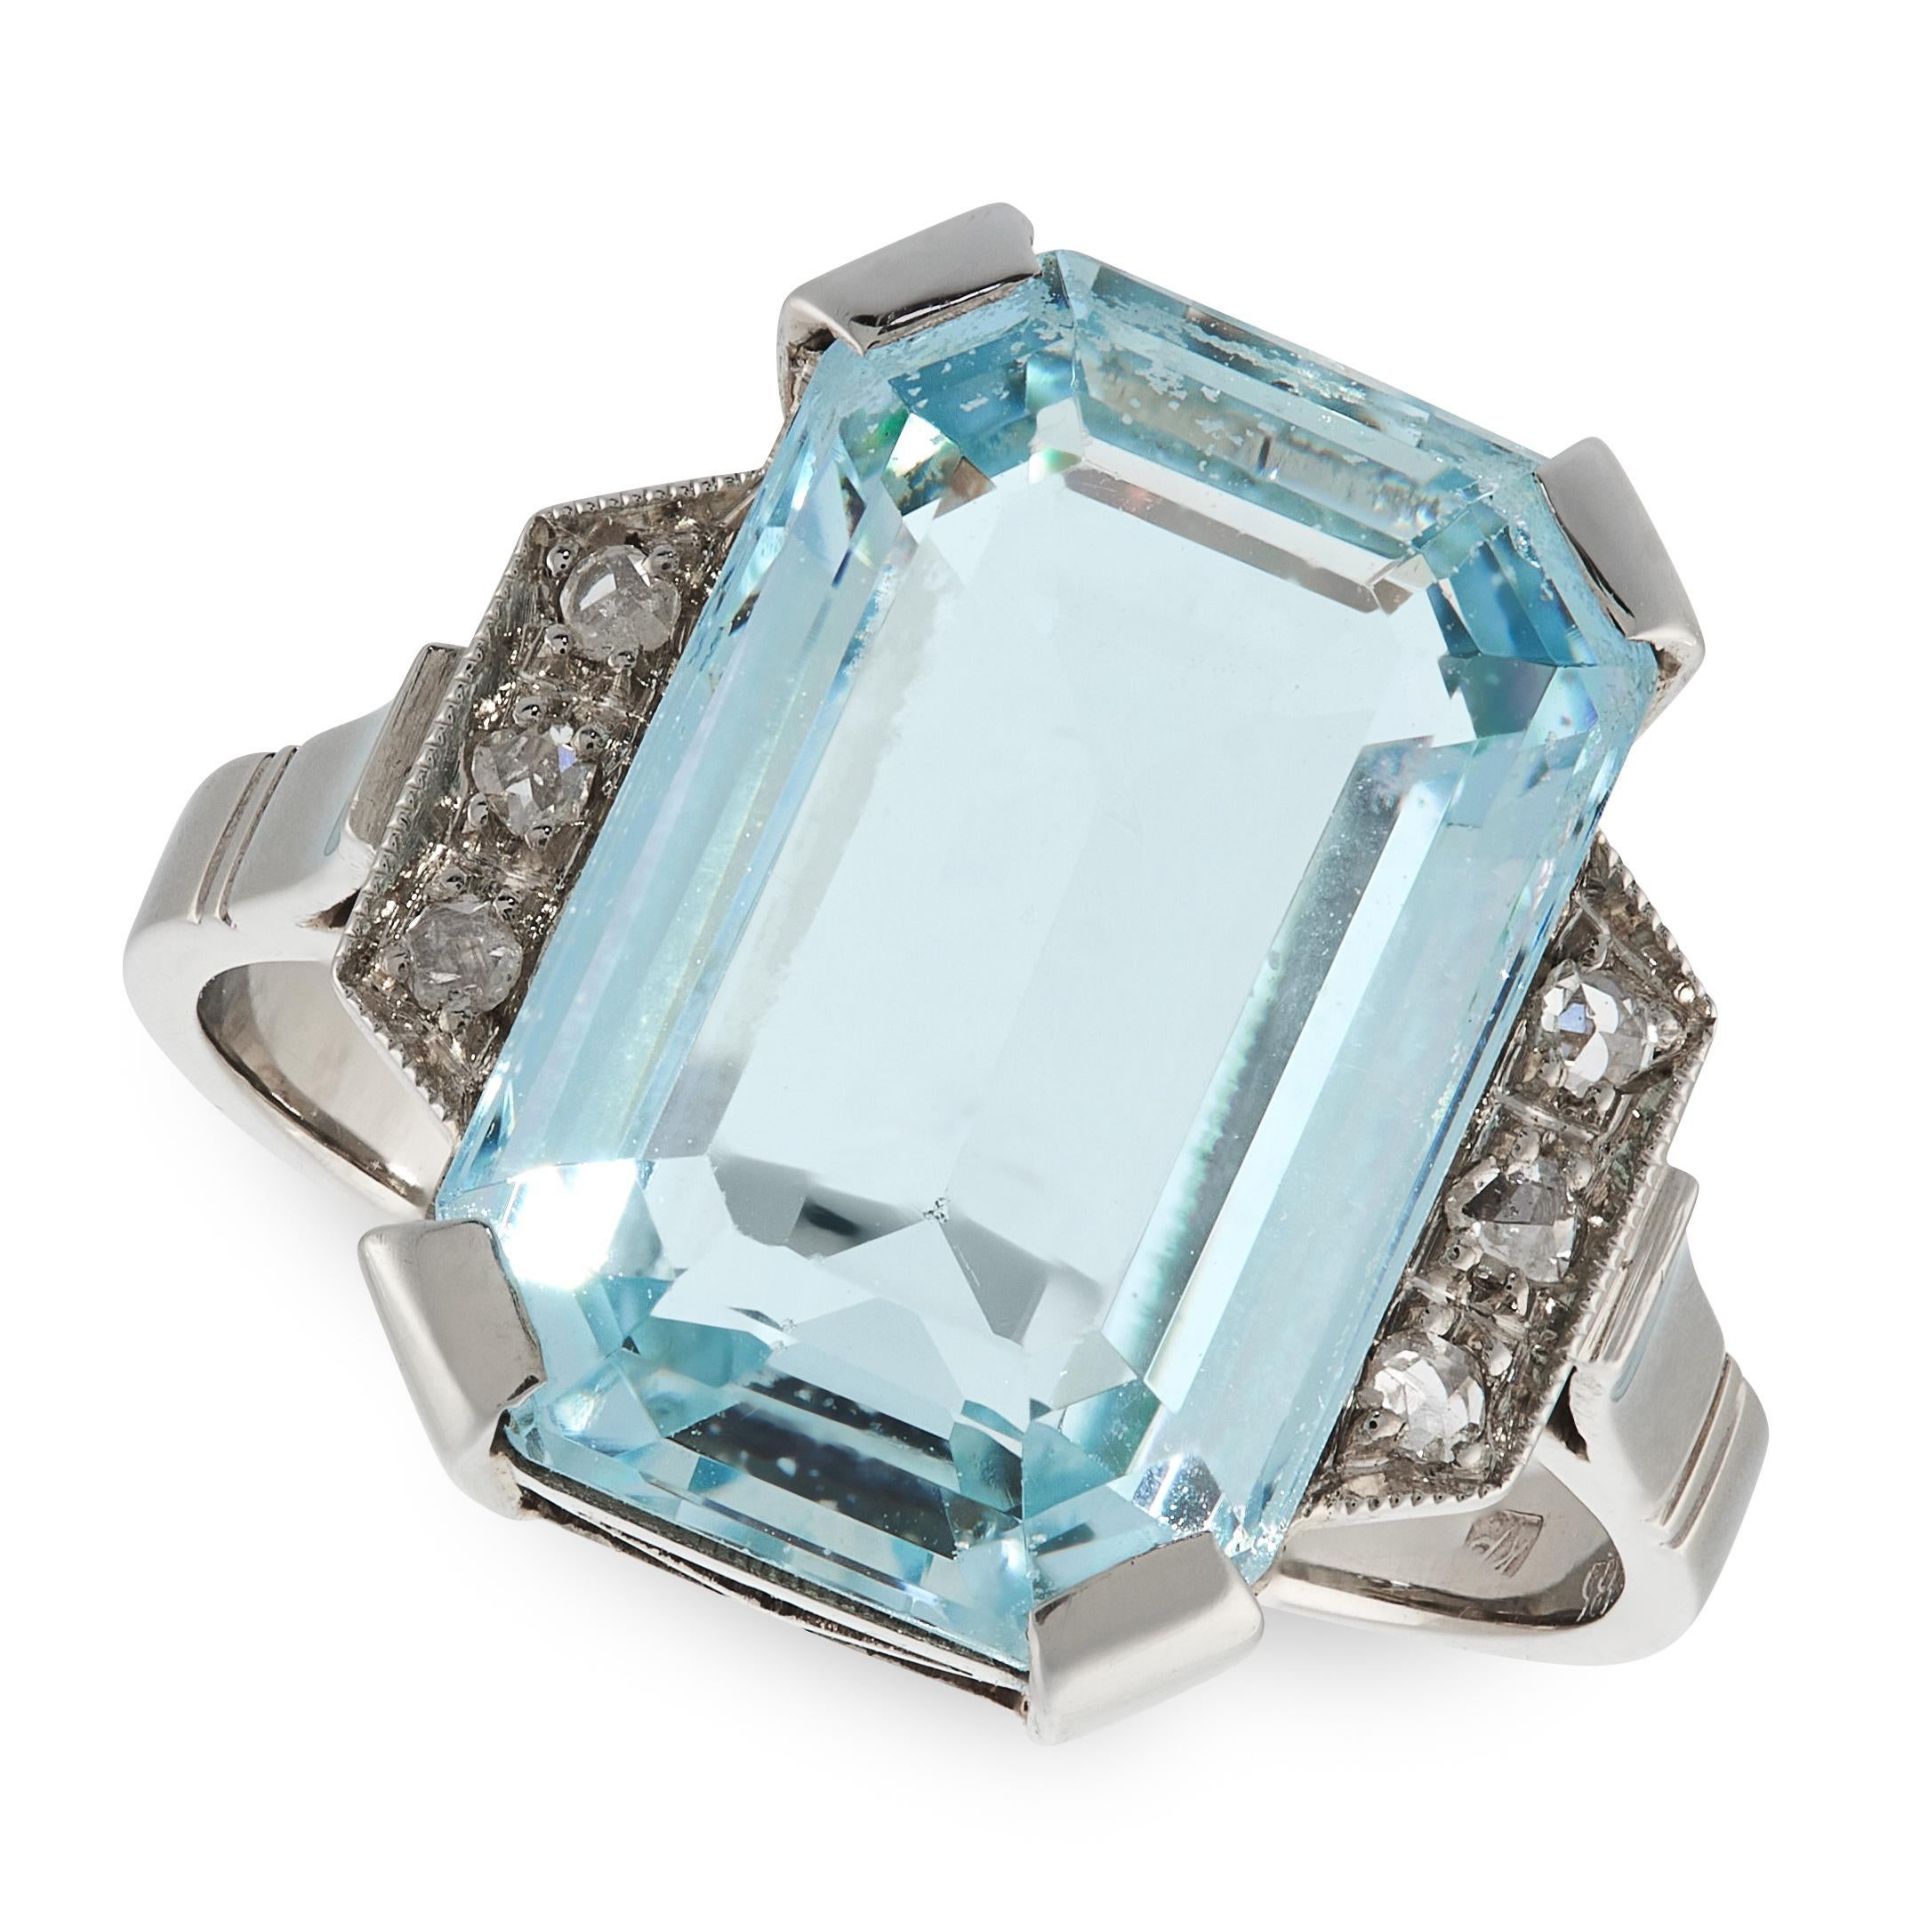 AN AQUAMARINE AND DIAMOND RING in white gold, set with an emerald cut aquamarine of 5.72 carats,